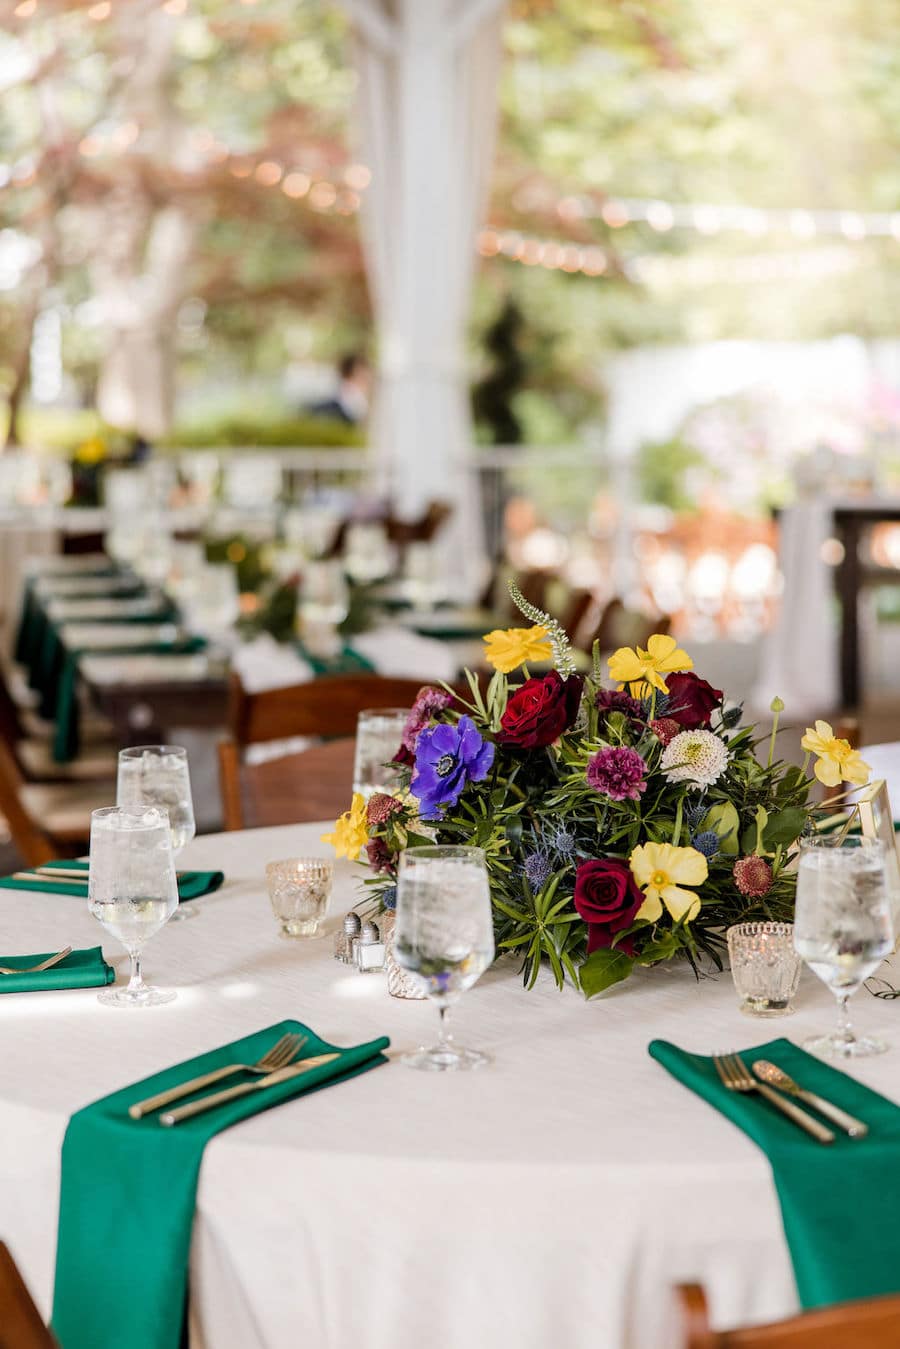 Bright Wedding Colors with Greenery and Candles at Franklin, TN Venue